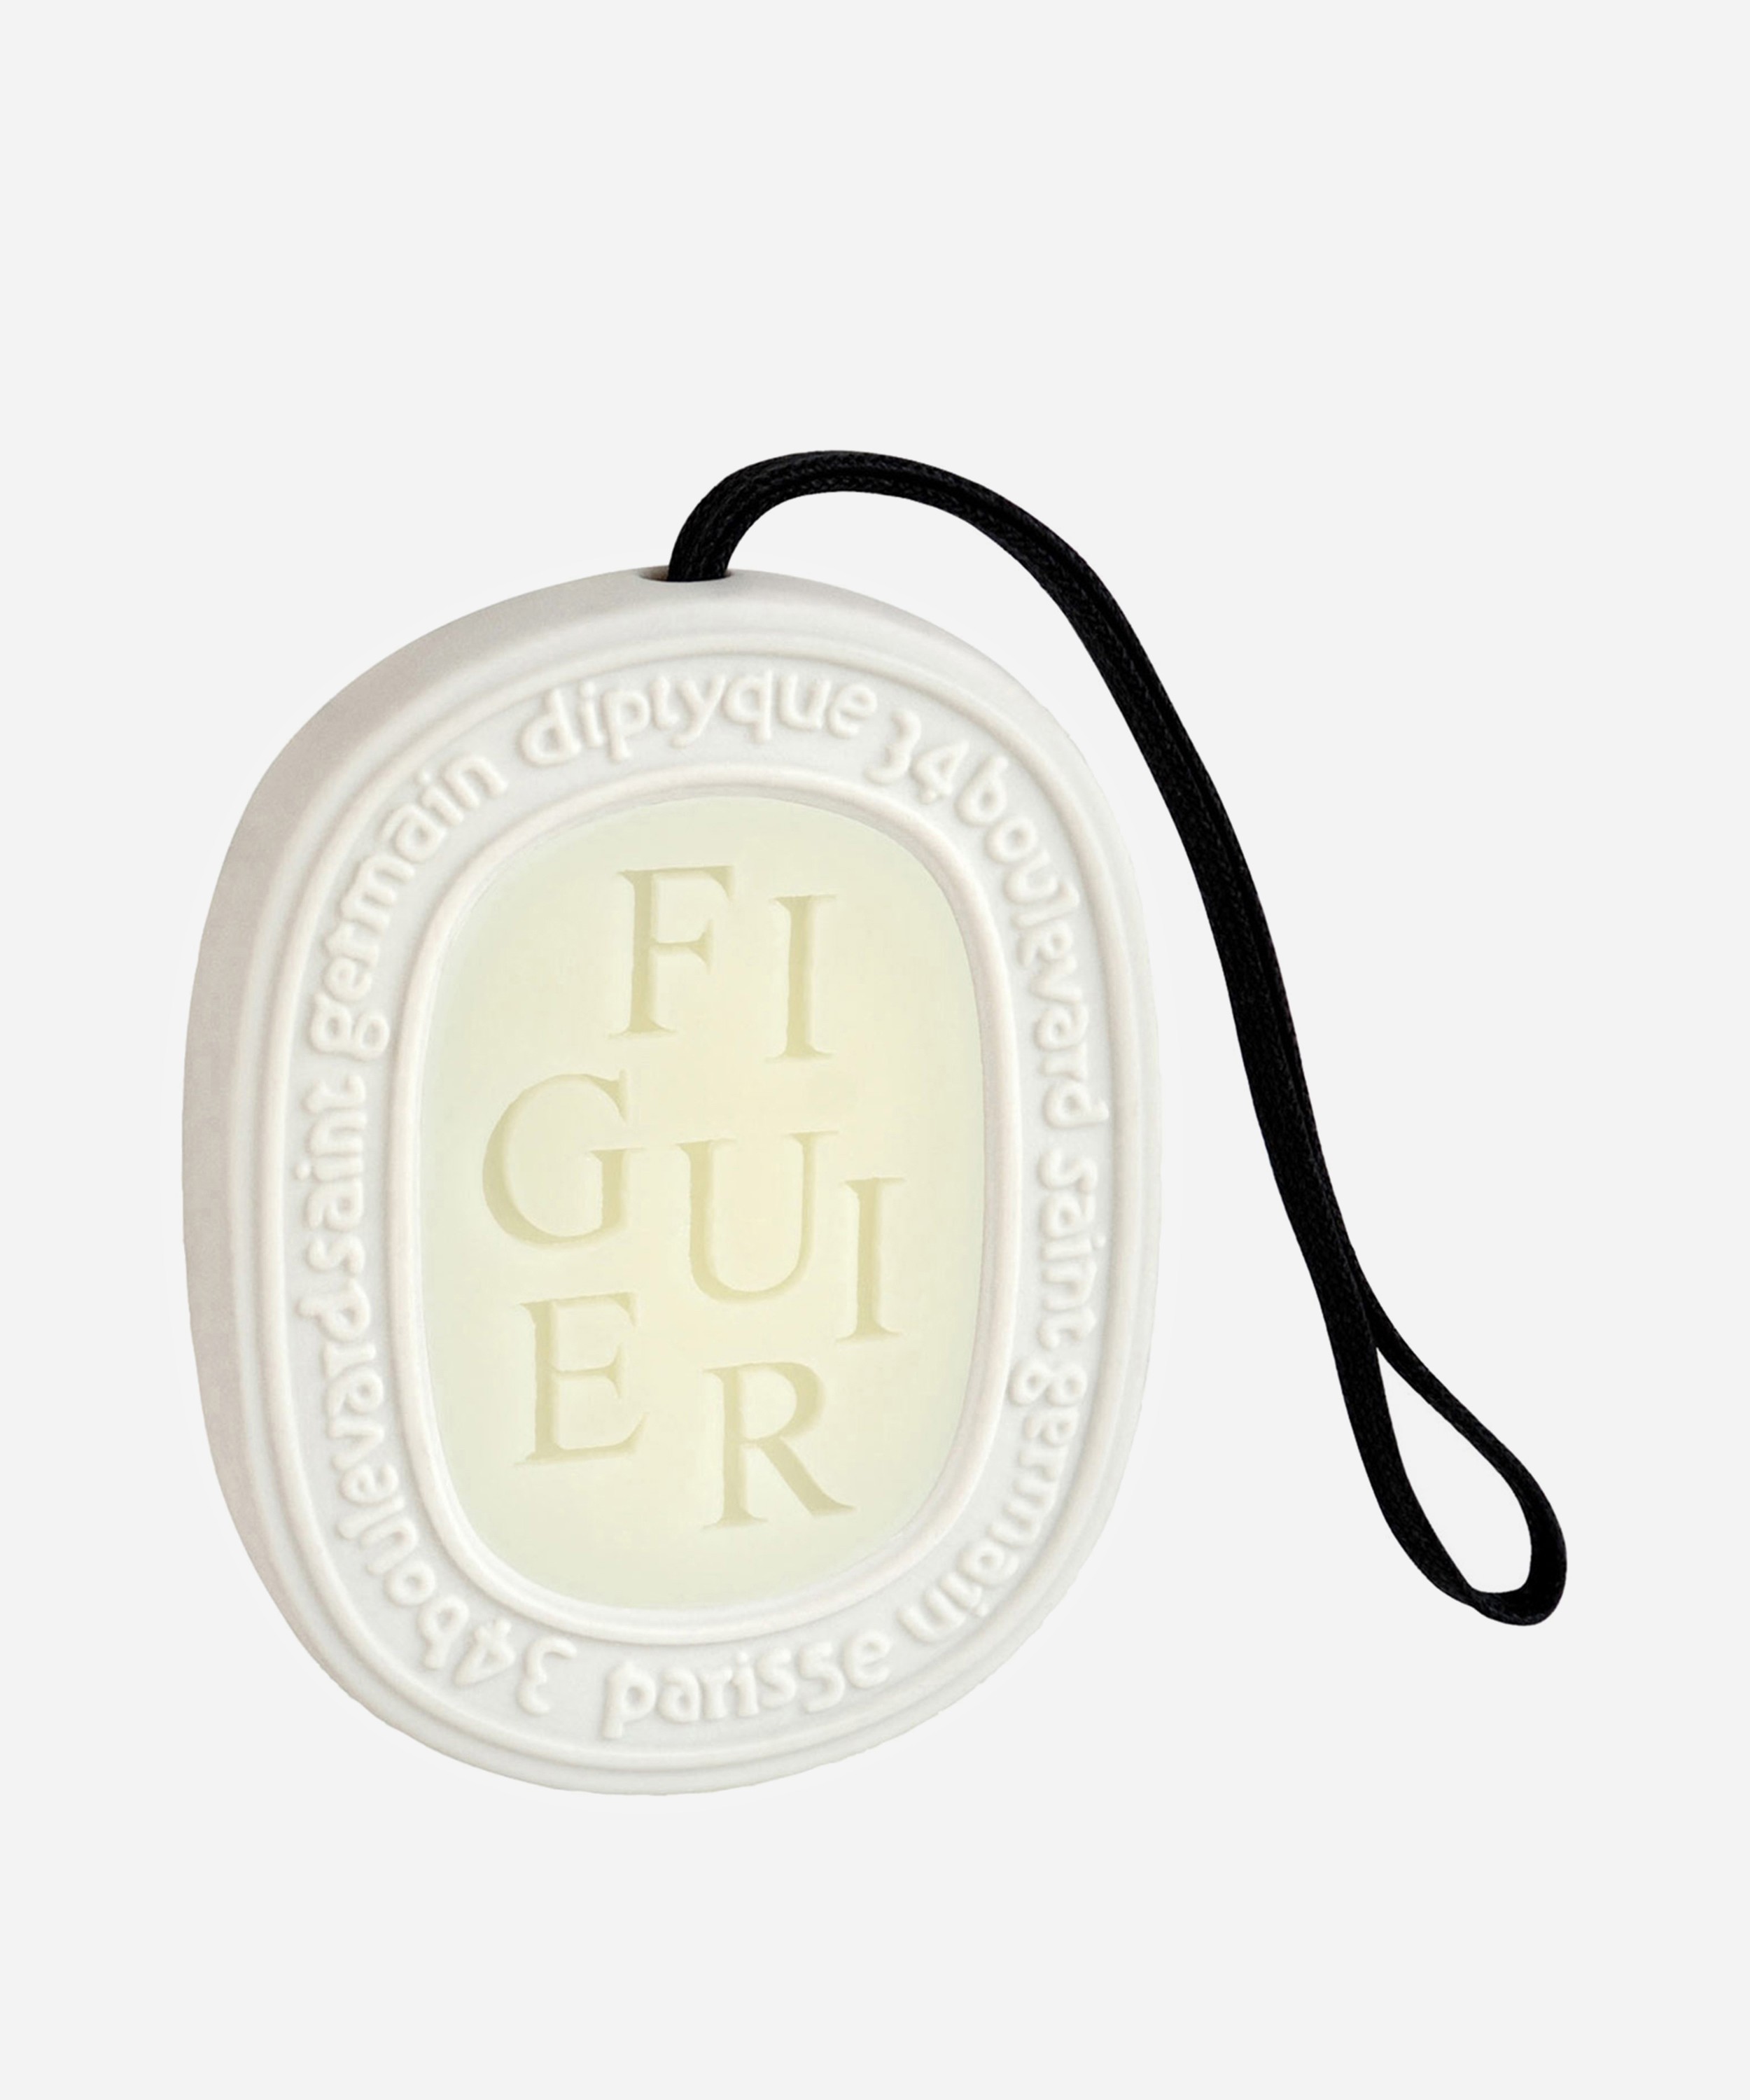 Diptyque - Figuier Scented Oval image number 0